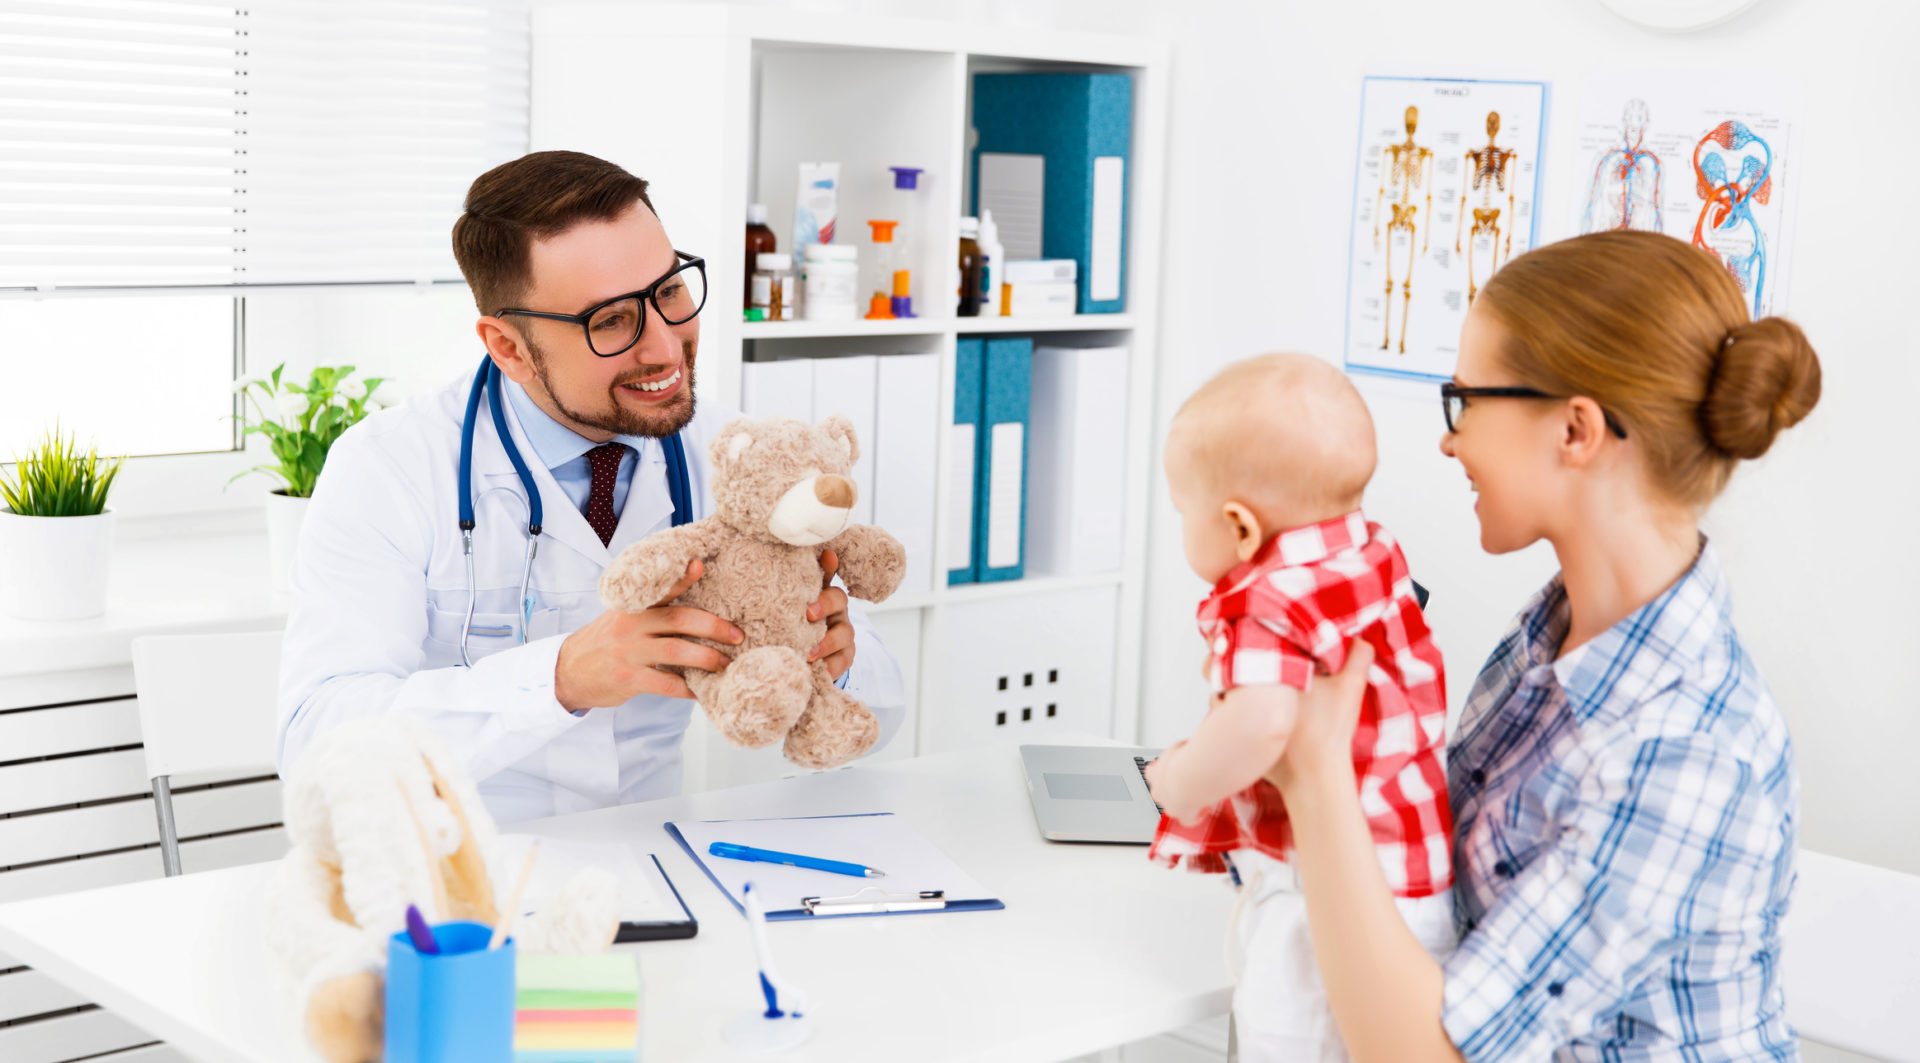 Free Pediatrics MOC Practice Questions to Test Yourself